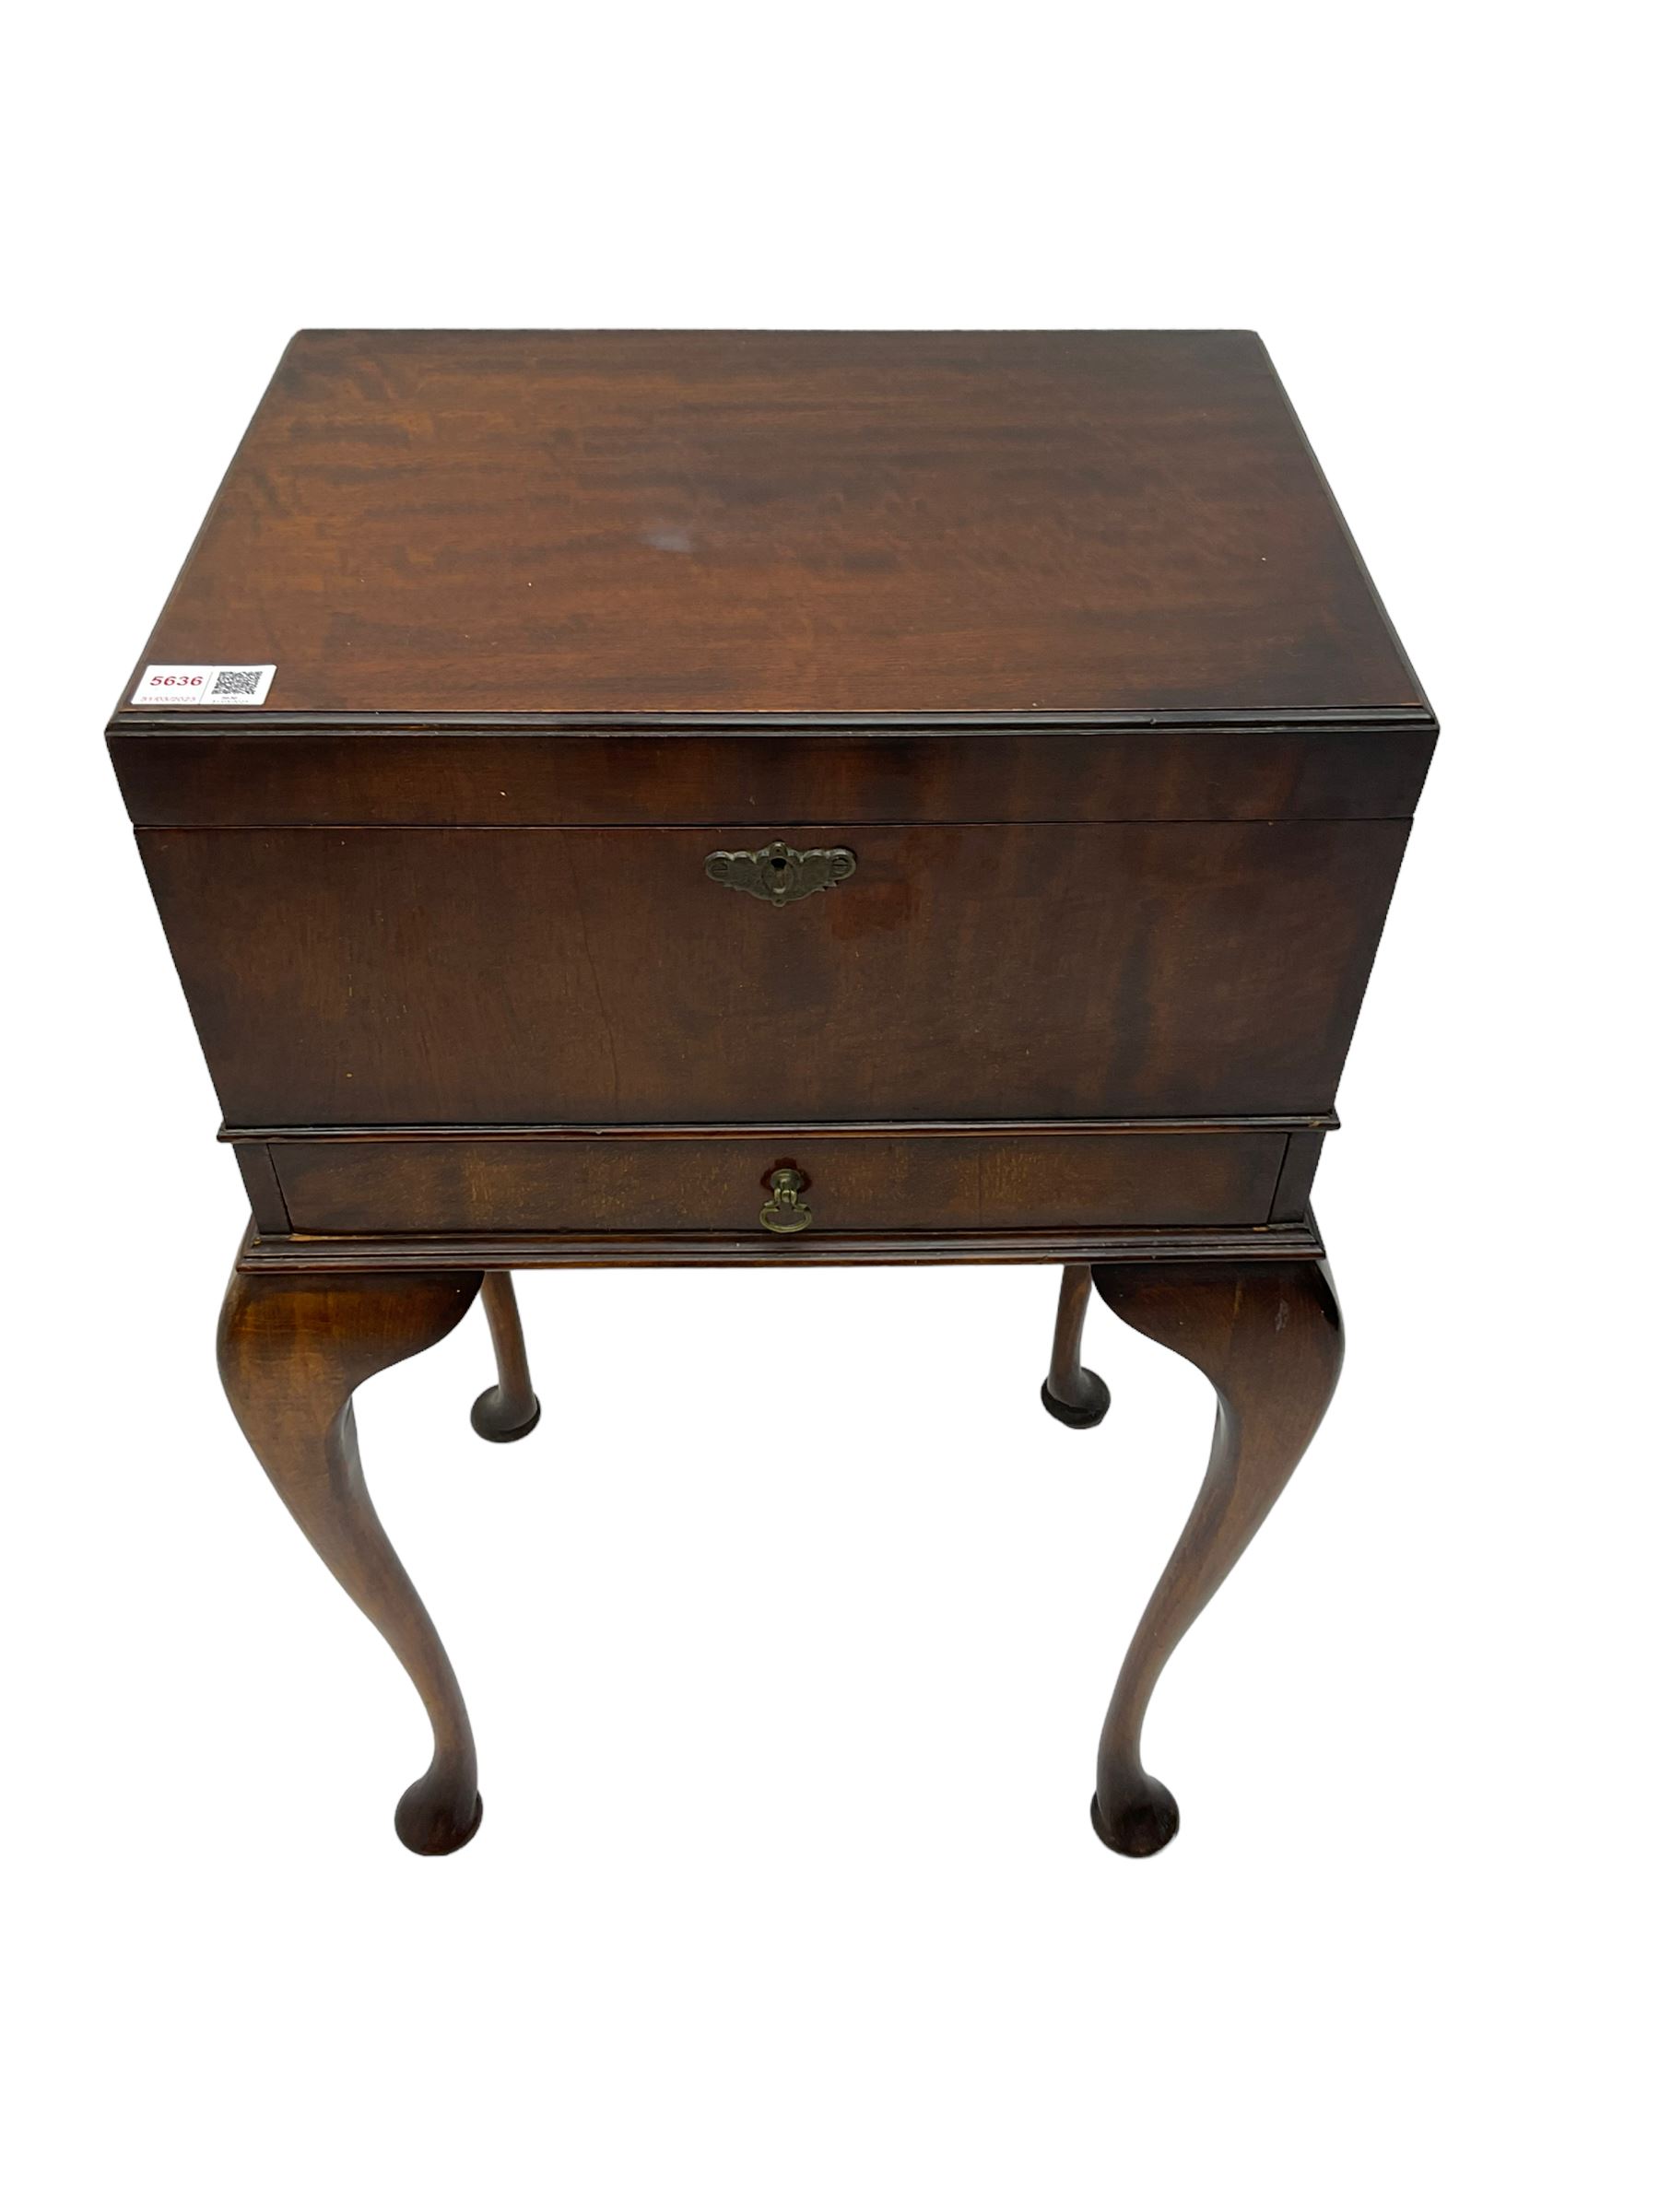 Early 20th century mahogany sewing or work box - Image 2 of 3